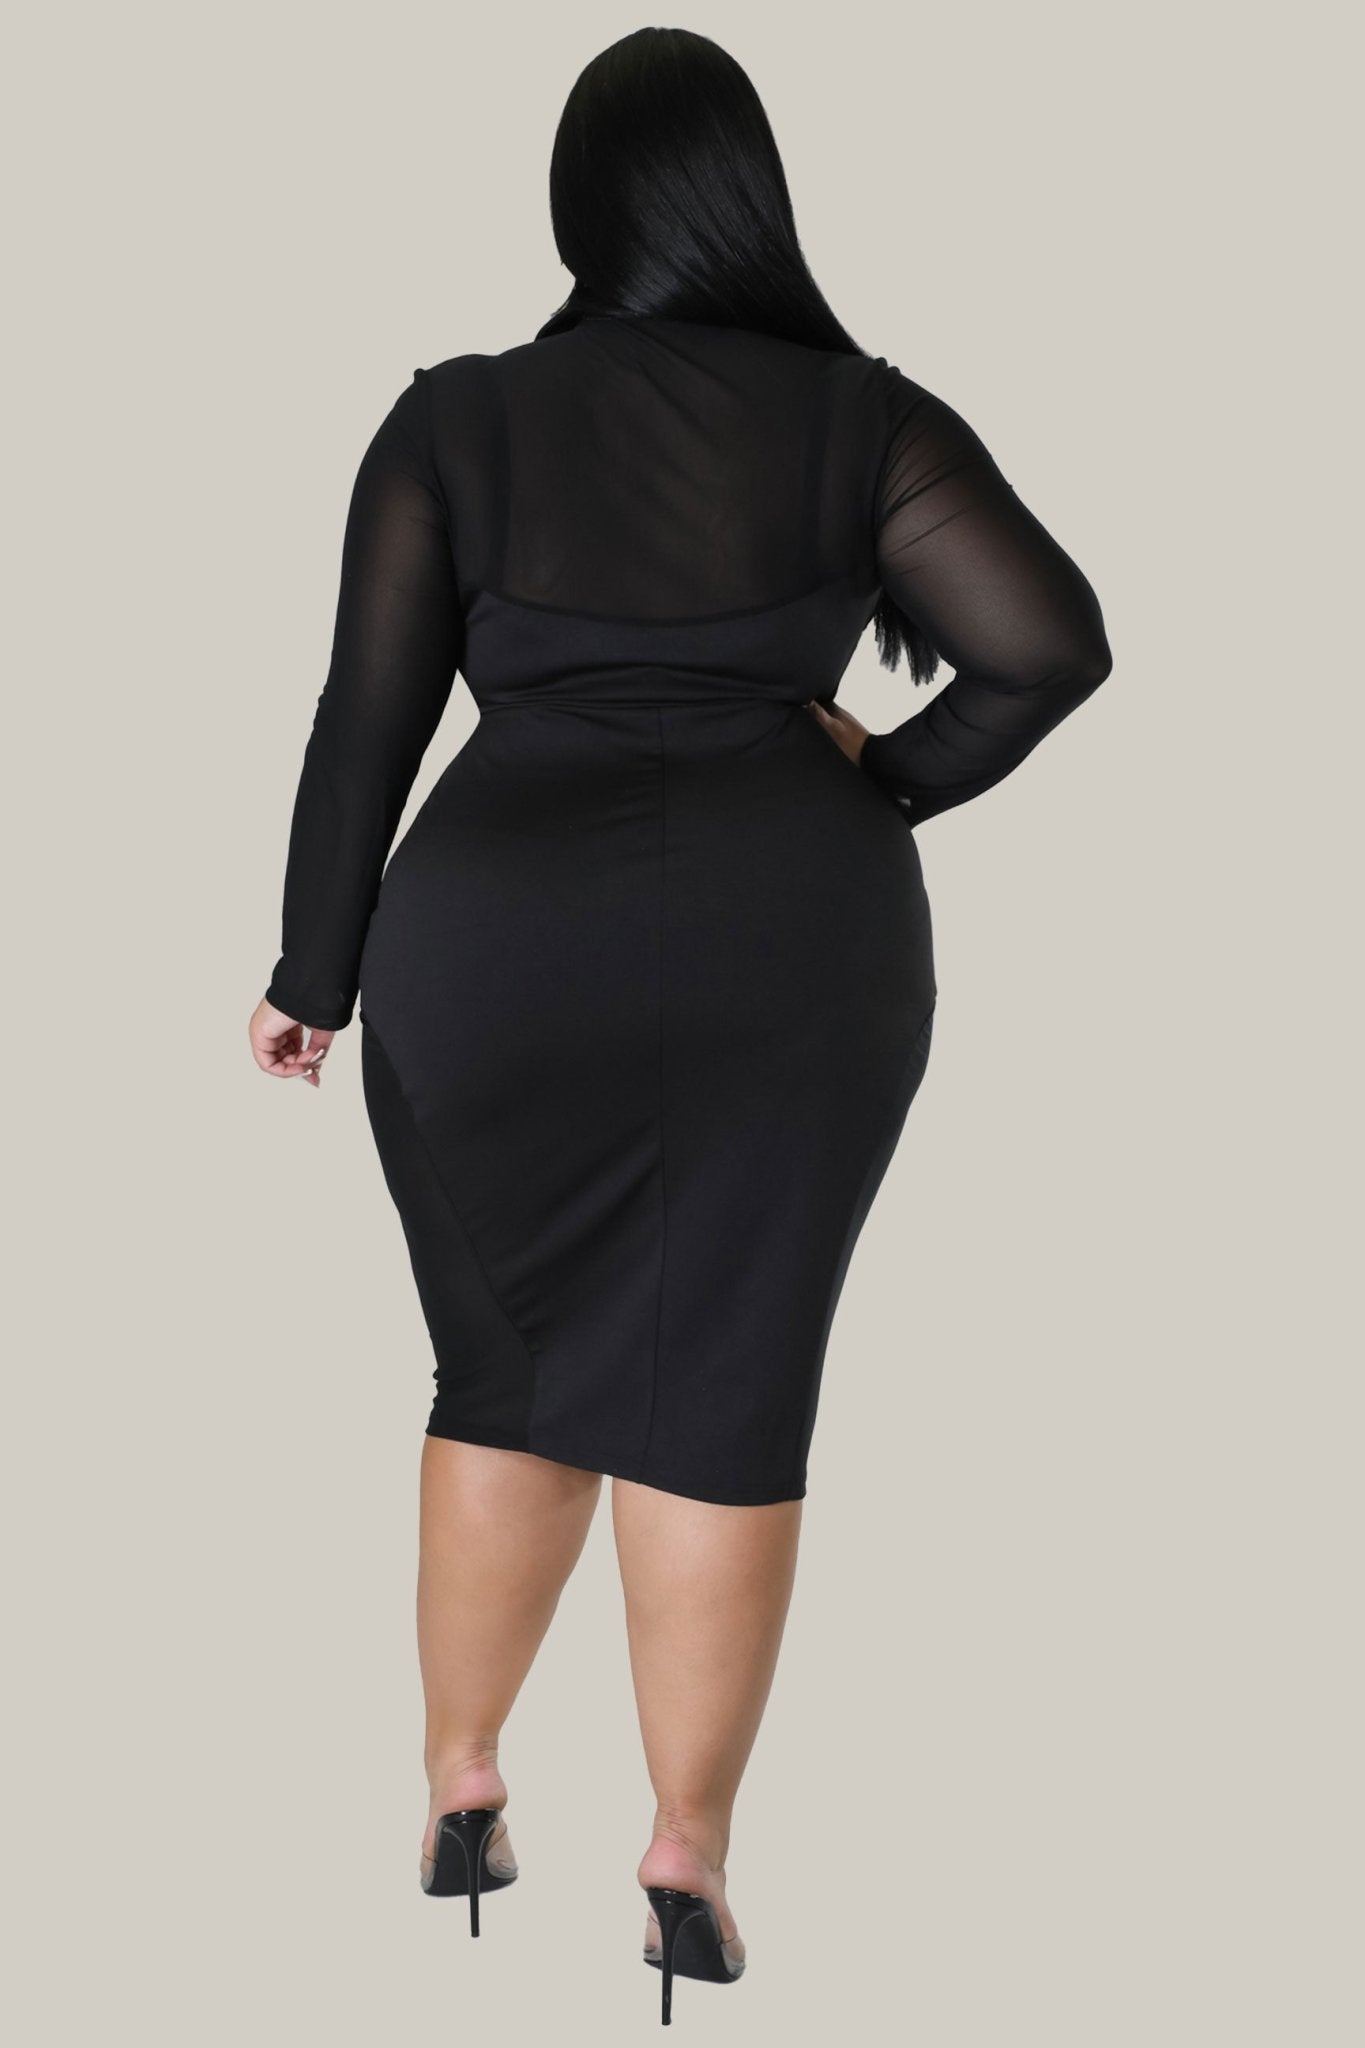 Lucille Babe Mesh Insets Dress - MY SEXY STYLES